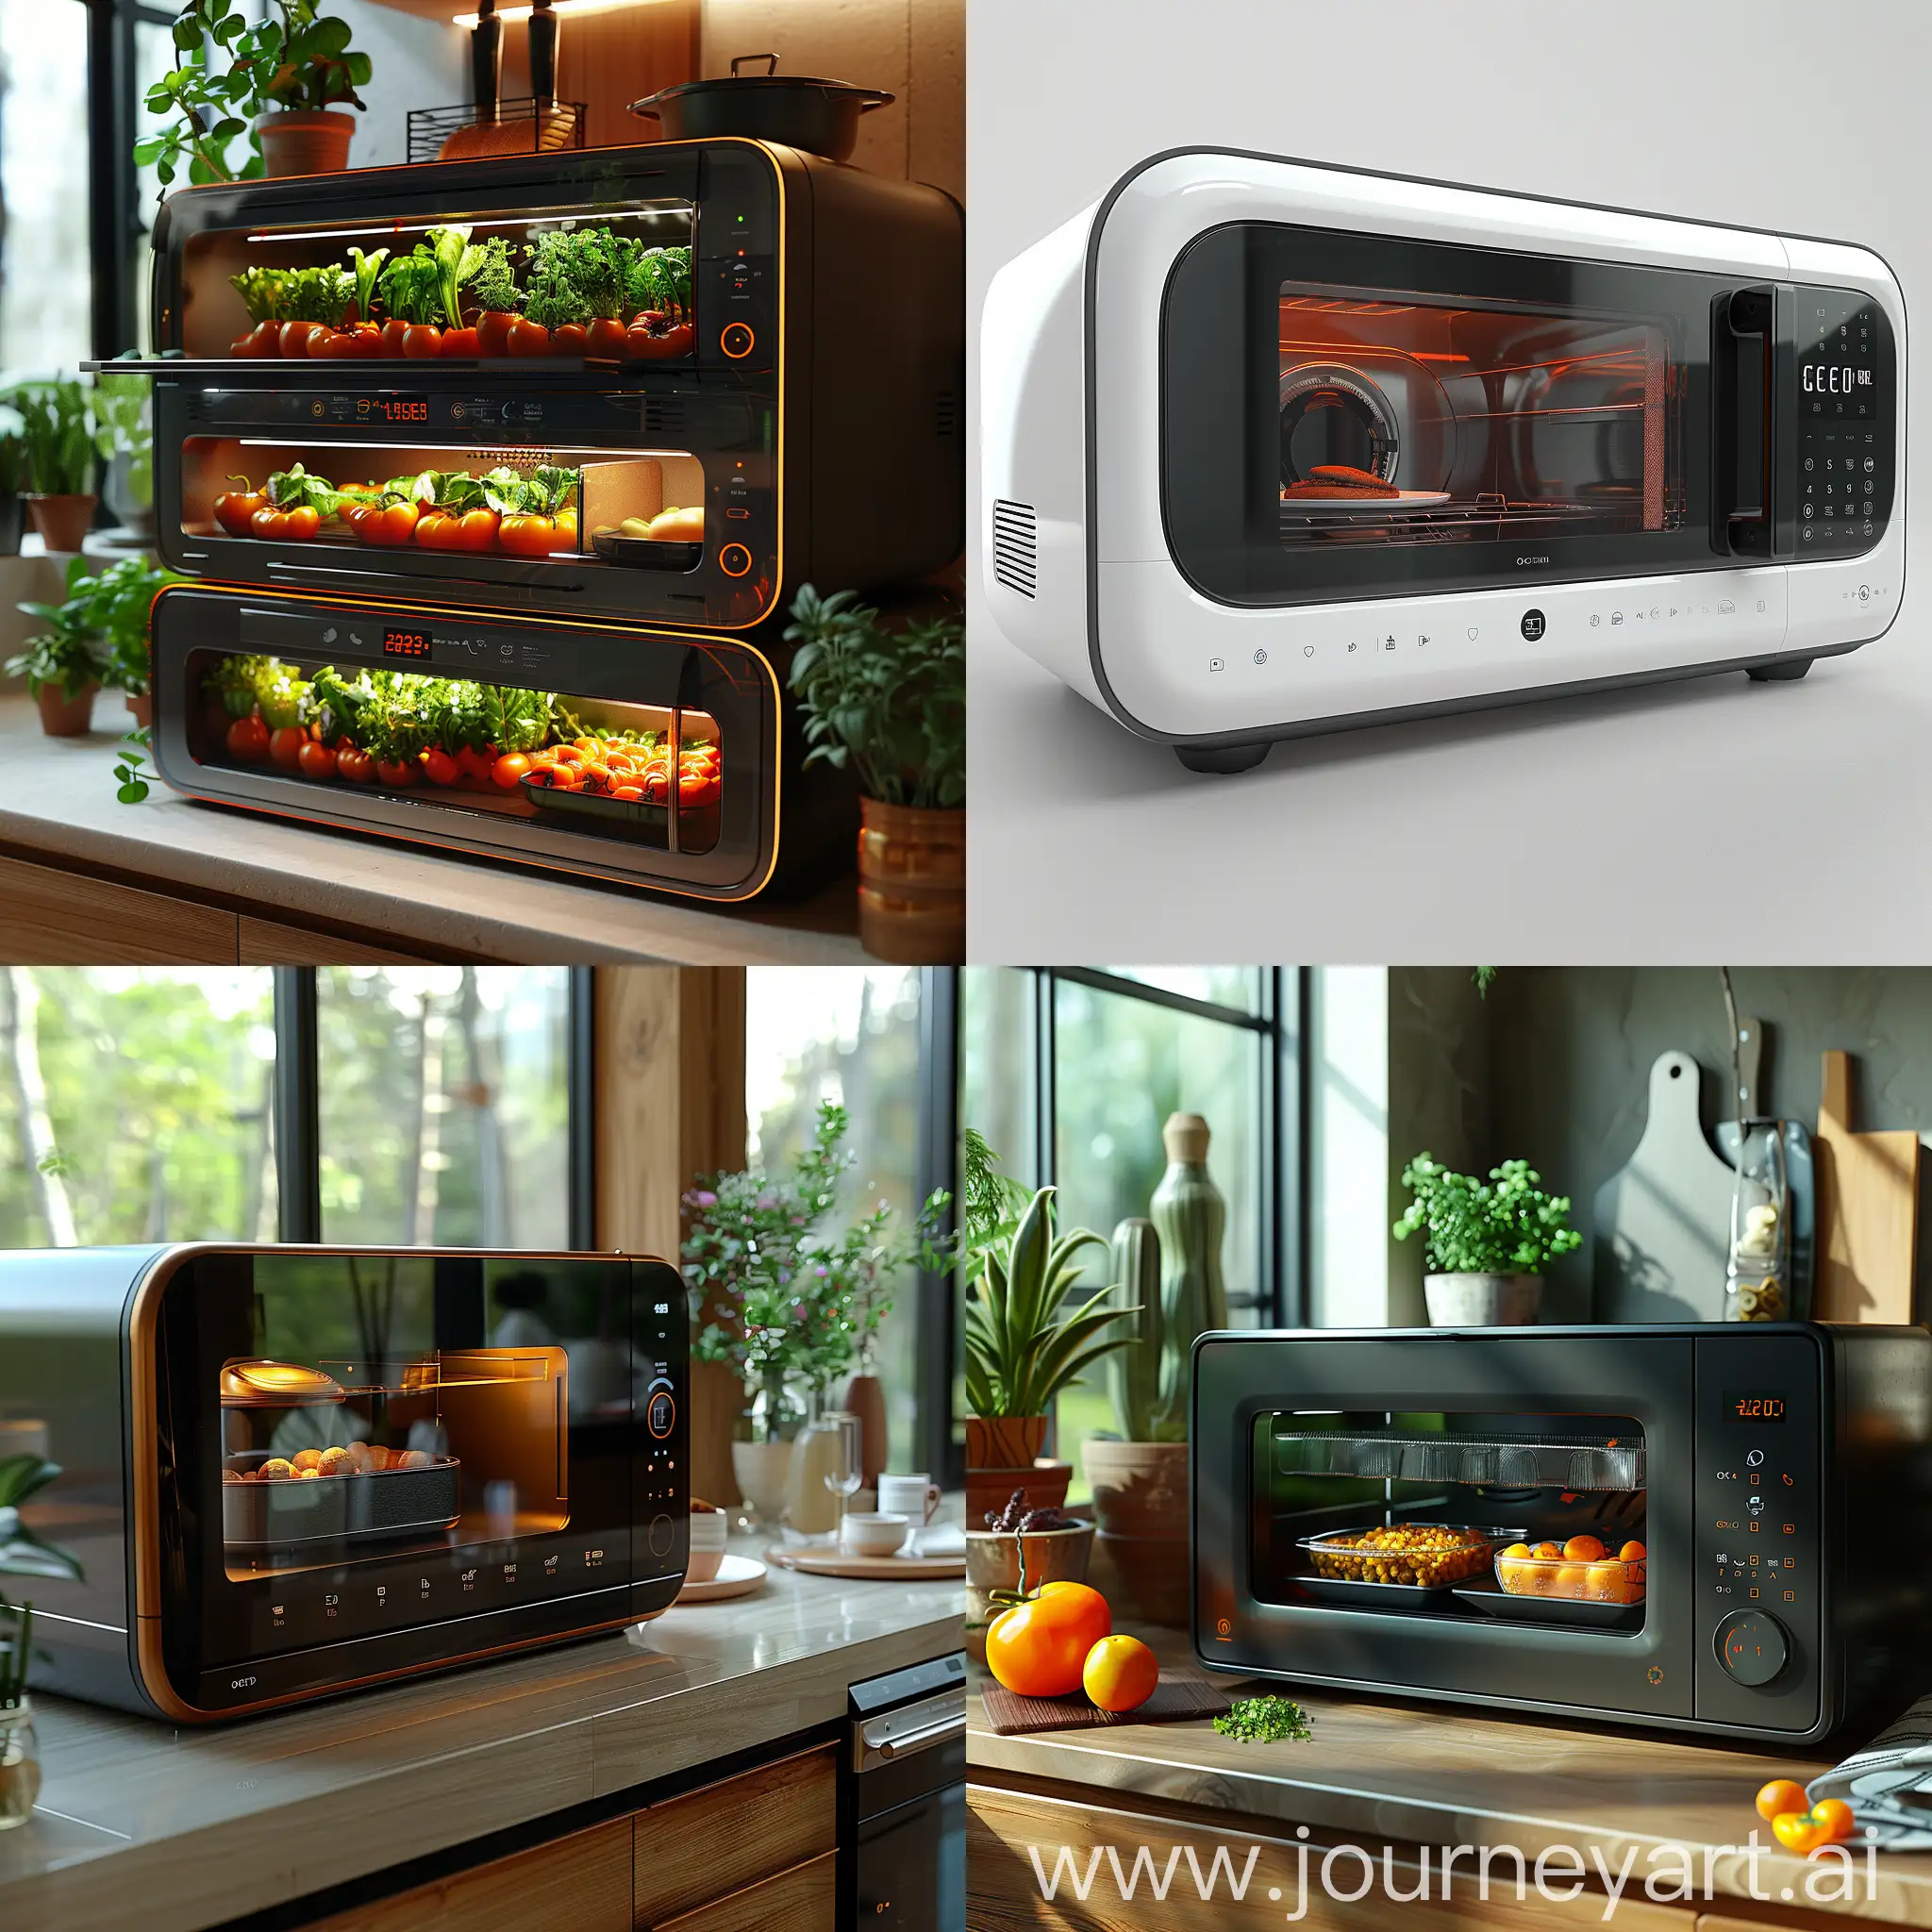 Smart-Microwave-with-Voice-Control-and-Automated-Cooking